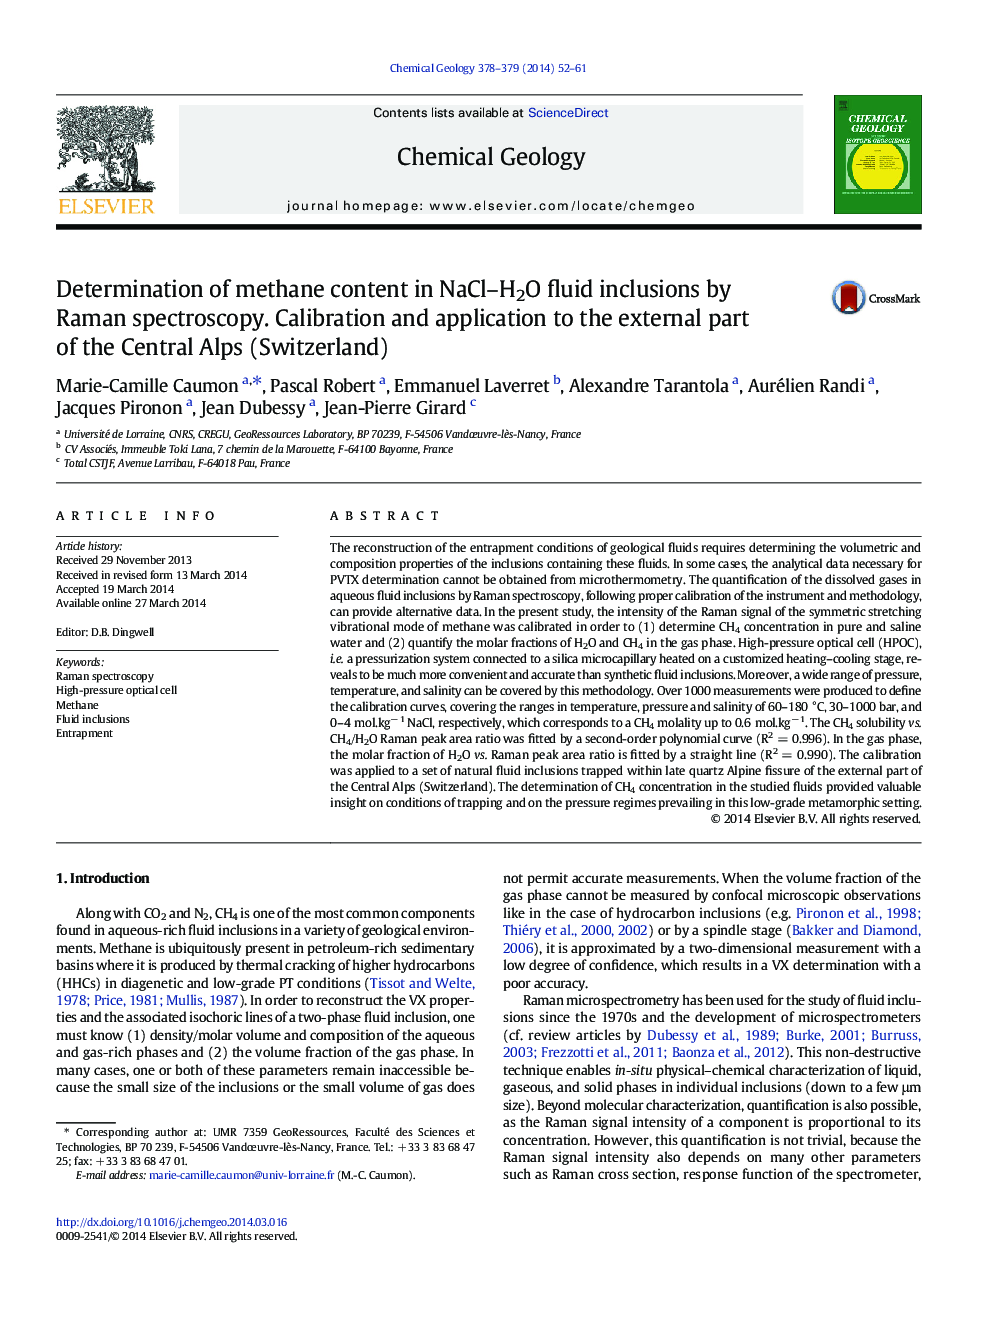 Determination of methane content in NaCl–H2O fluid inclusions by Raman spectroscopy. Calibration and application to the external part of the Central Alps (Switzerland)